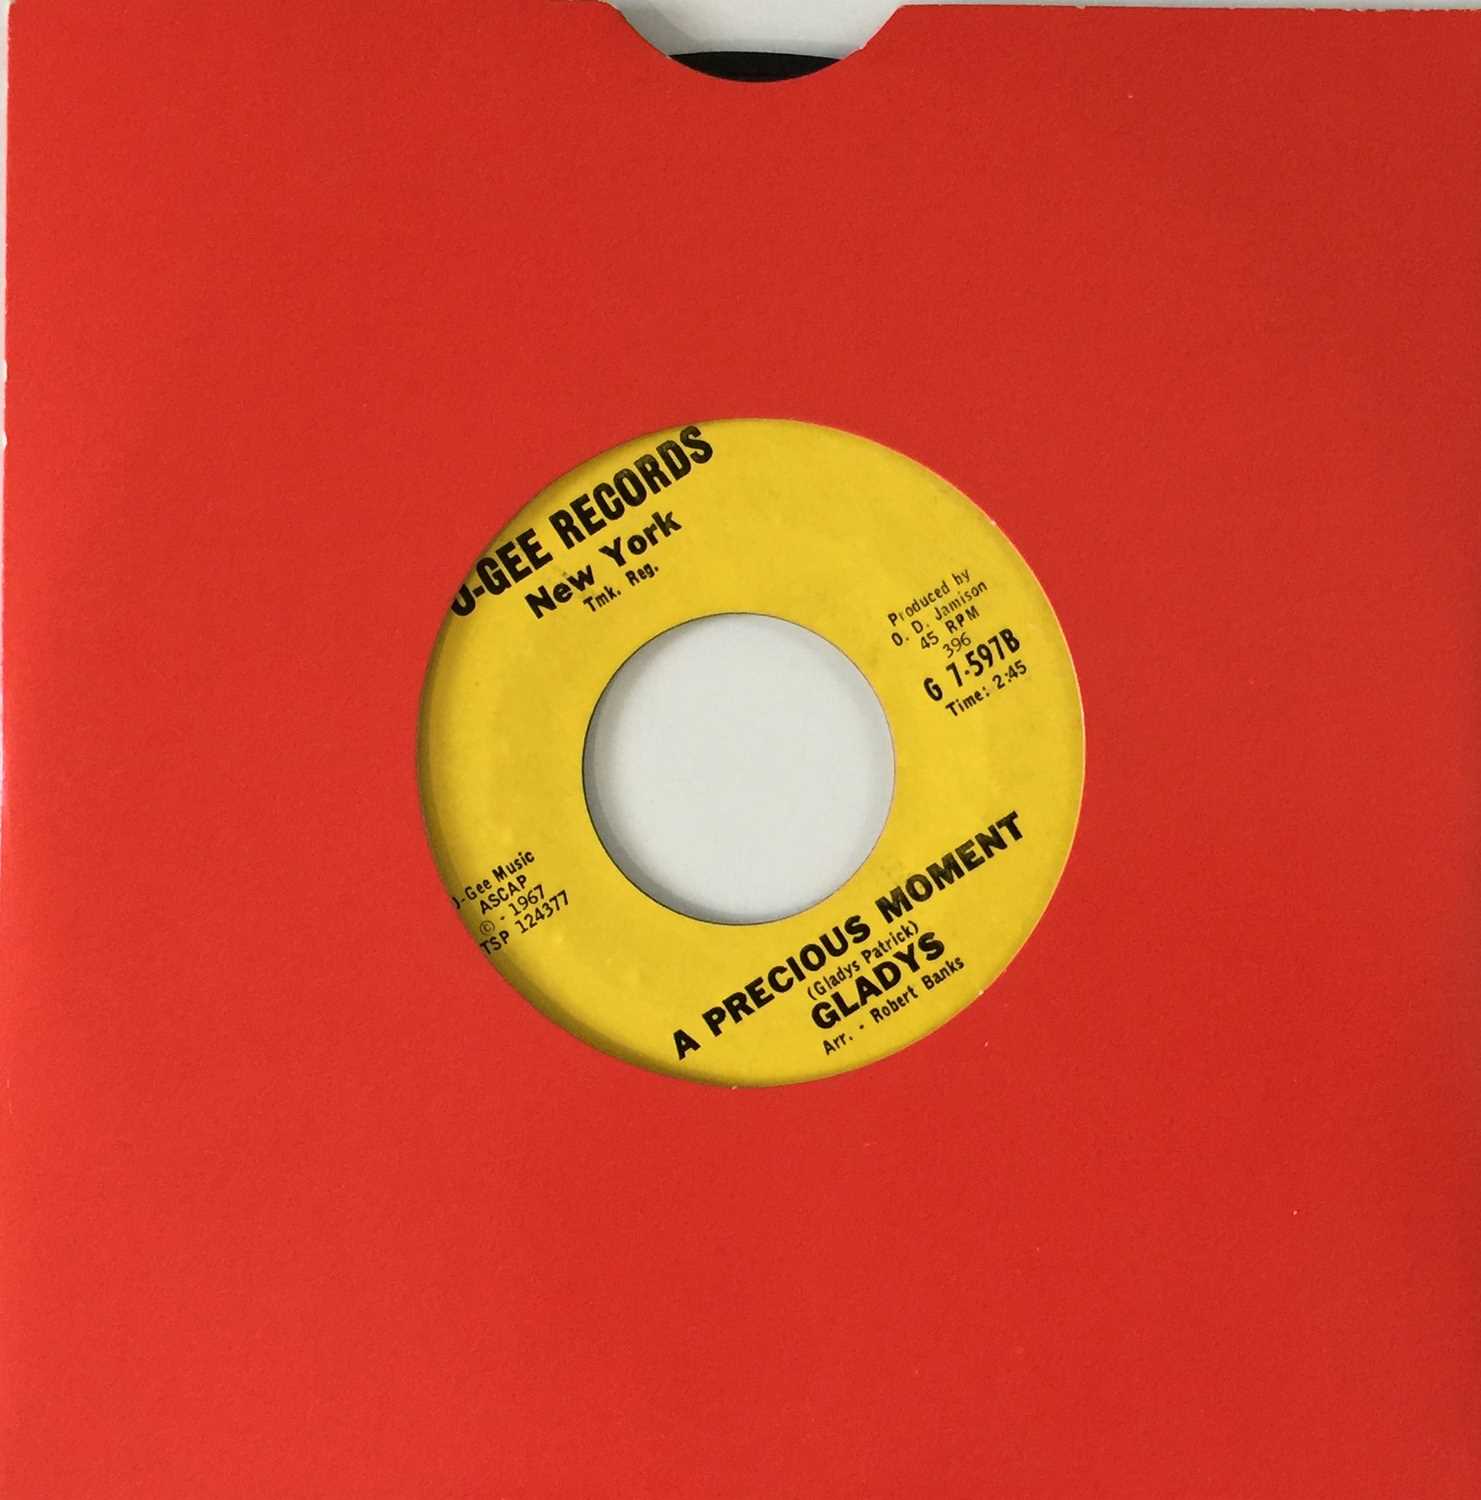 NORTHERN/SOUL - US 7" COLLECTION. - Image 6 of 6